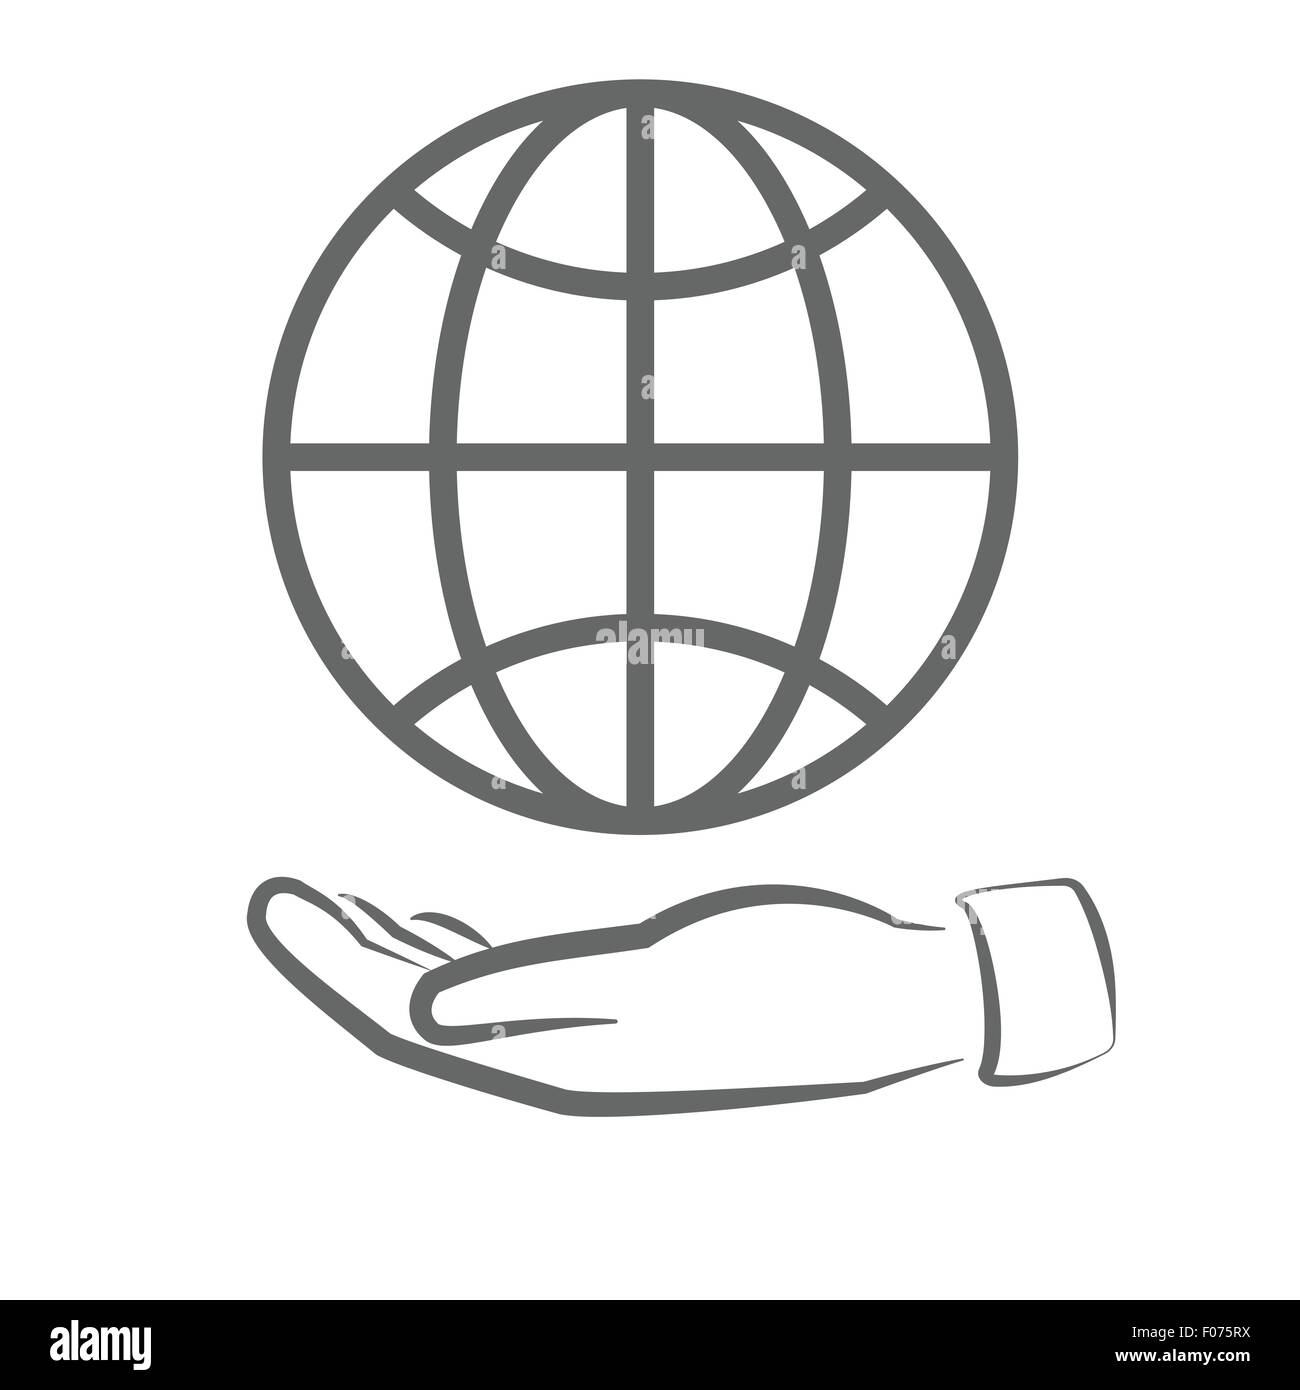 save world environment protection icon vector illustration Stock Vector